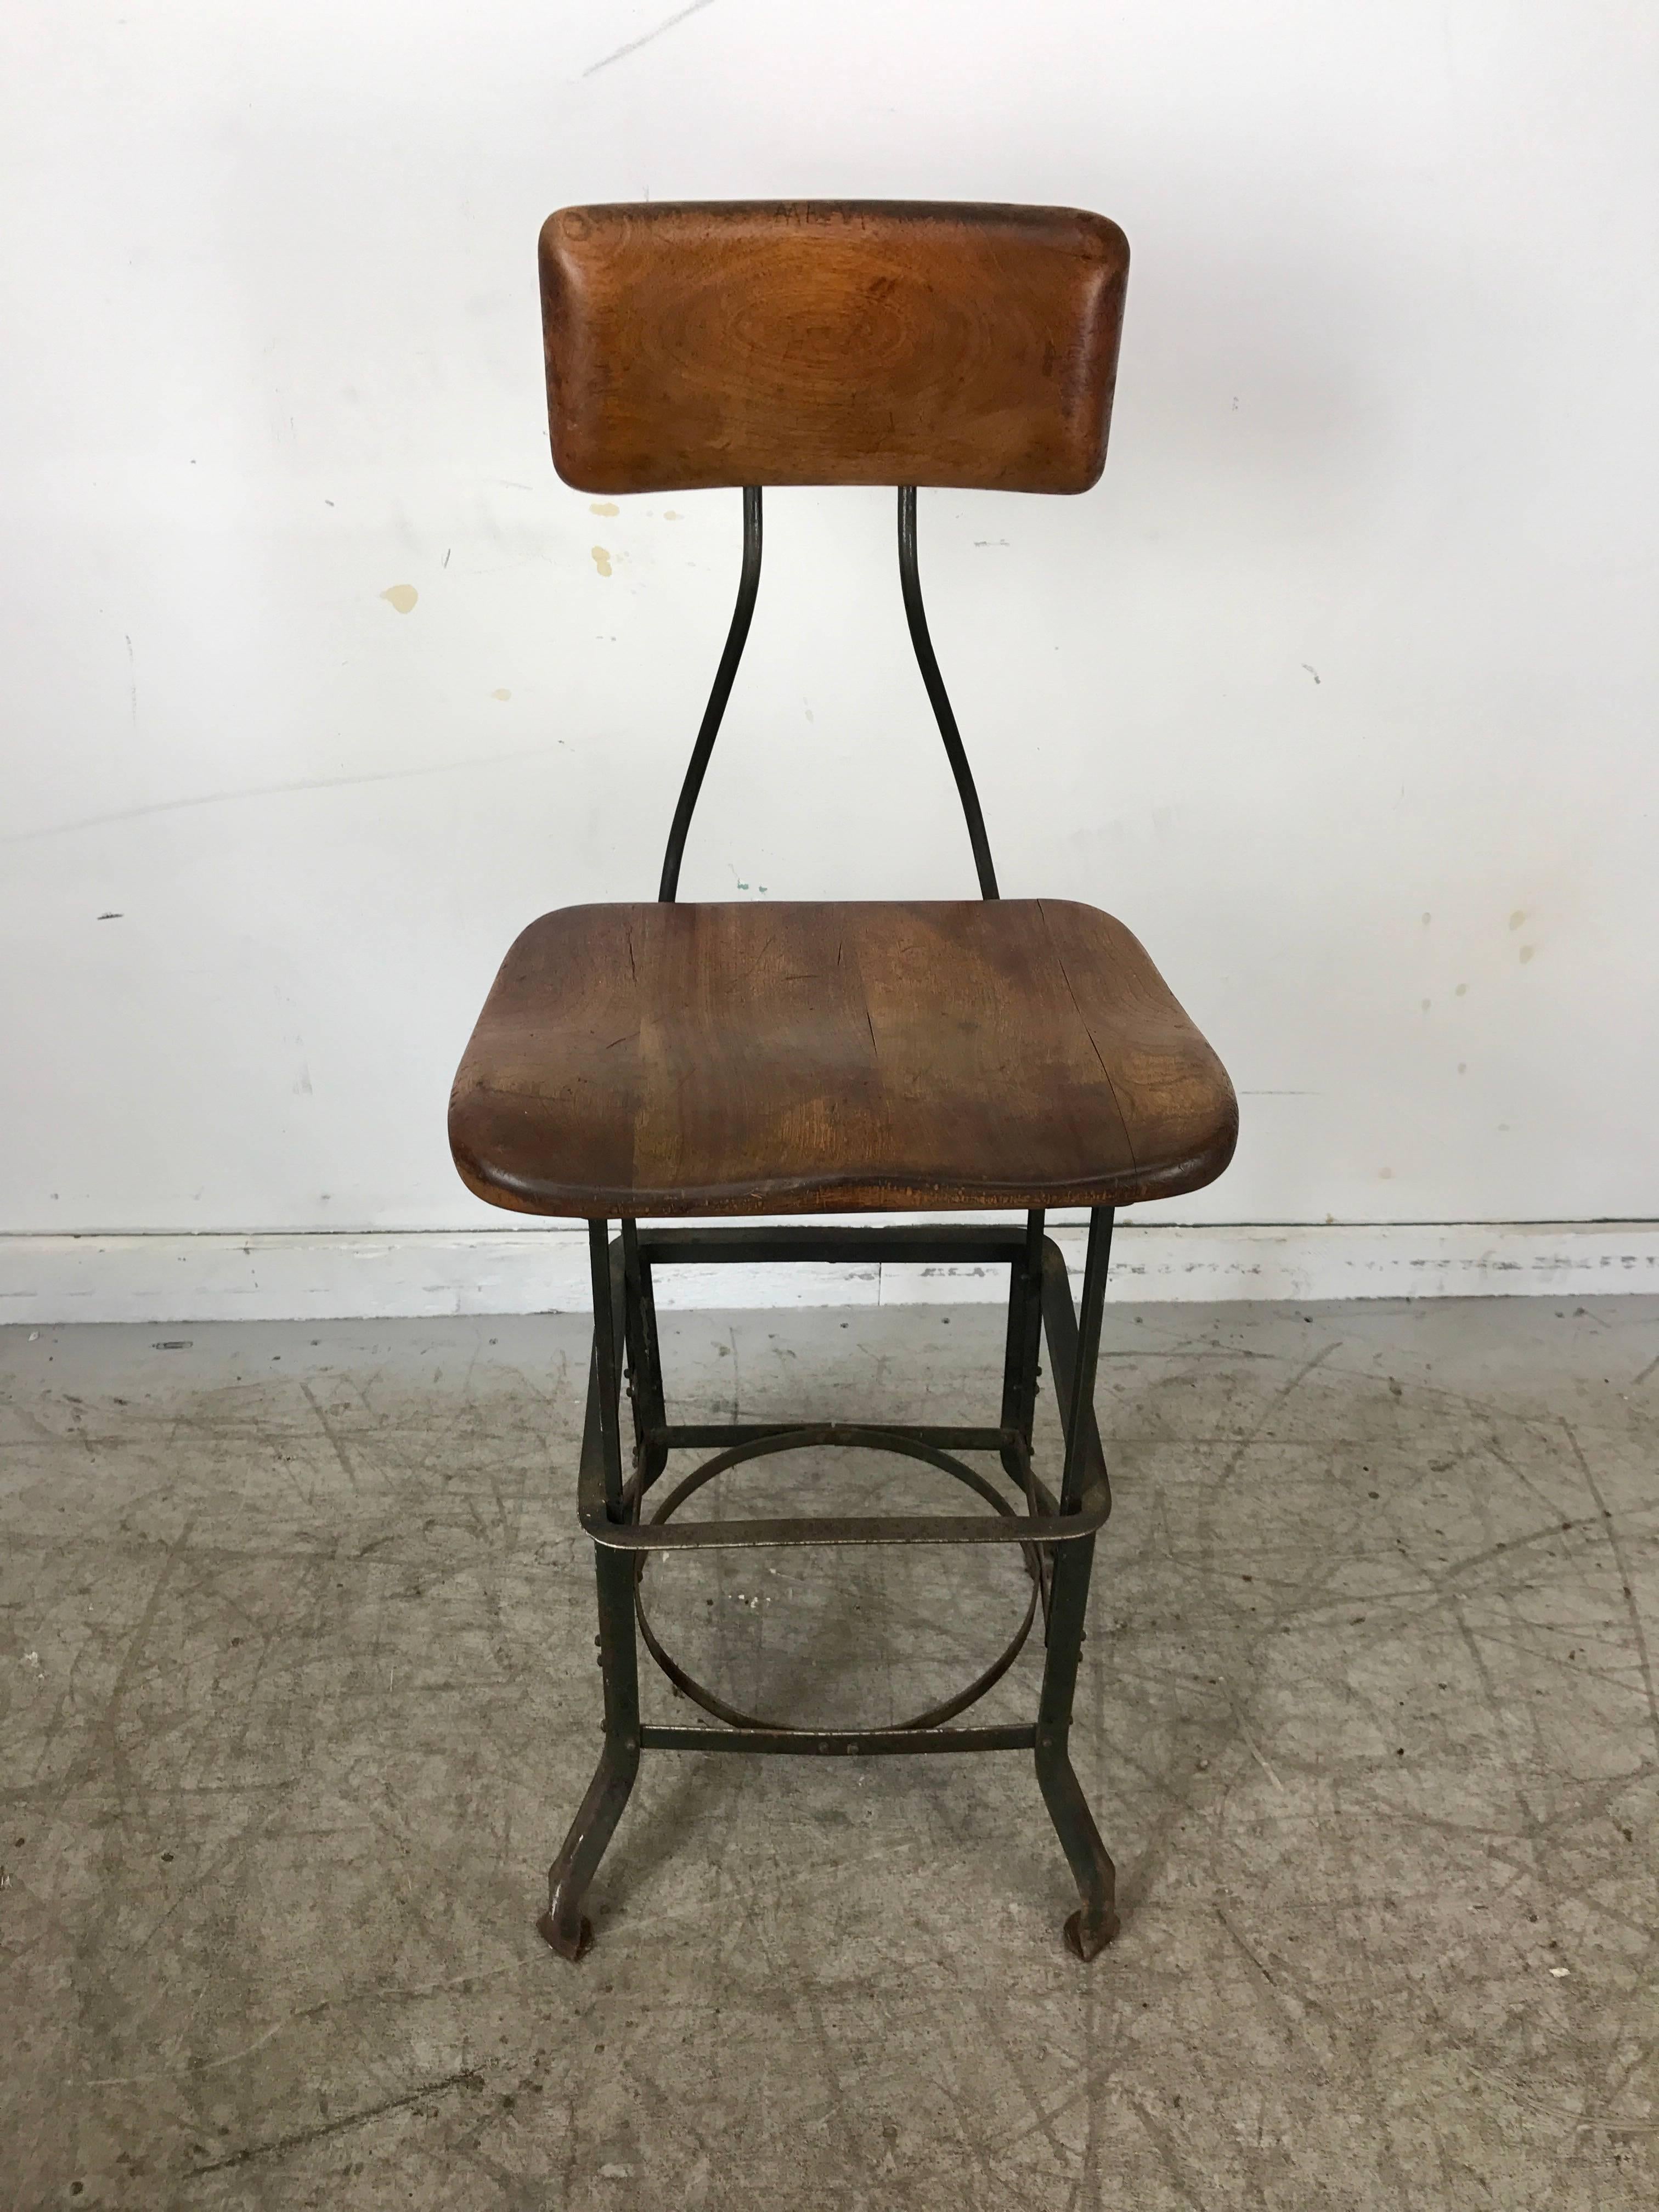 Early adjustable Industrial machinist stool, manufactured by Toledo,, Wonderful original patina color and surface. Solid carved wood top and back.